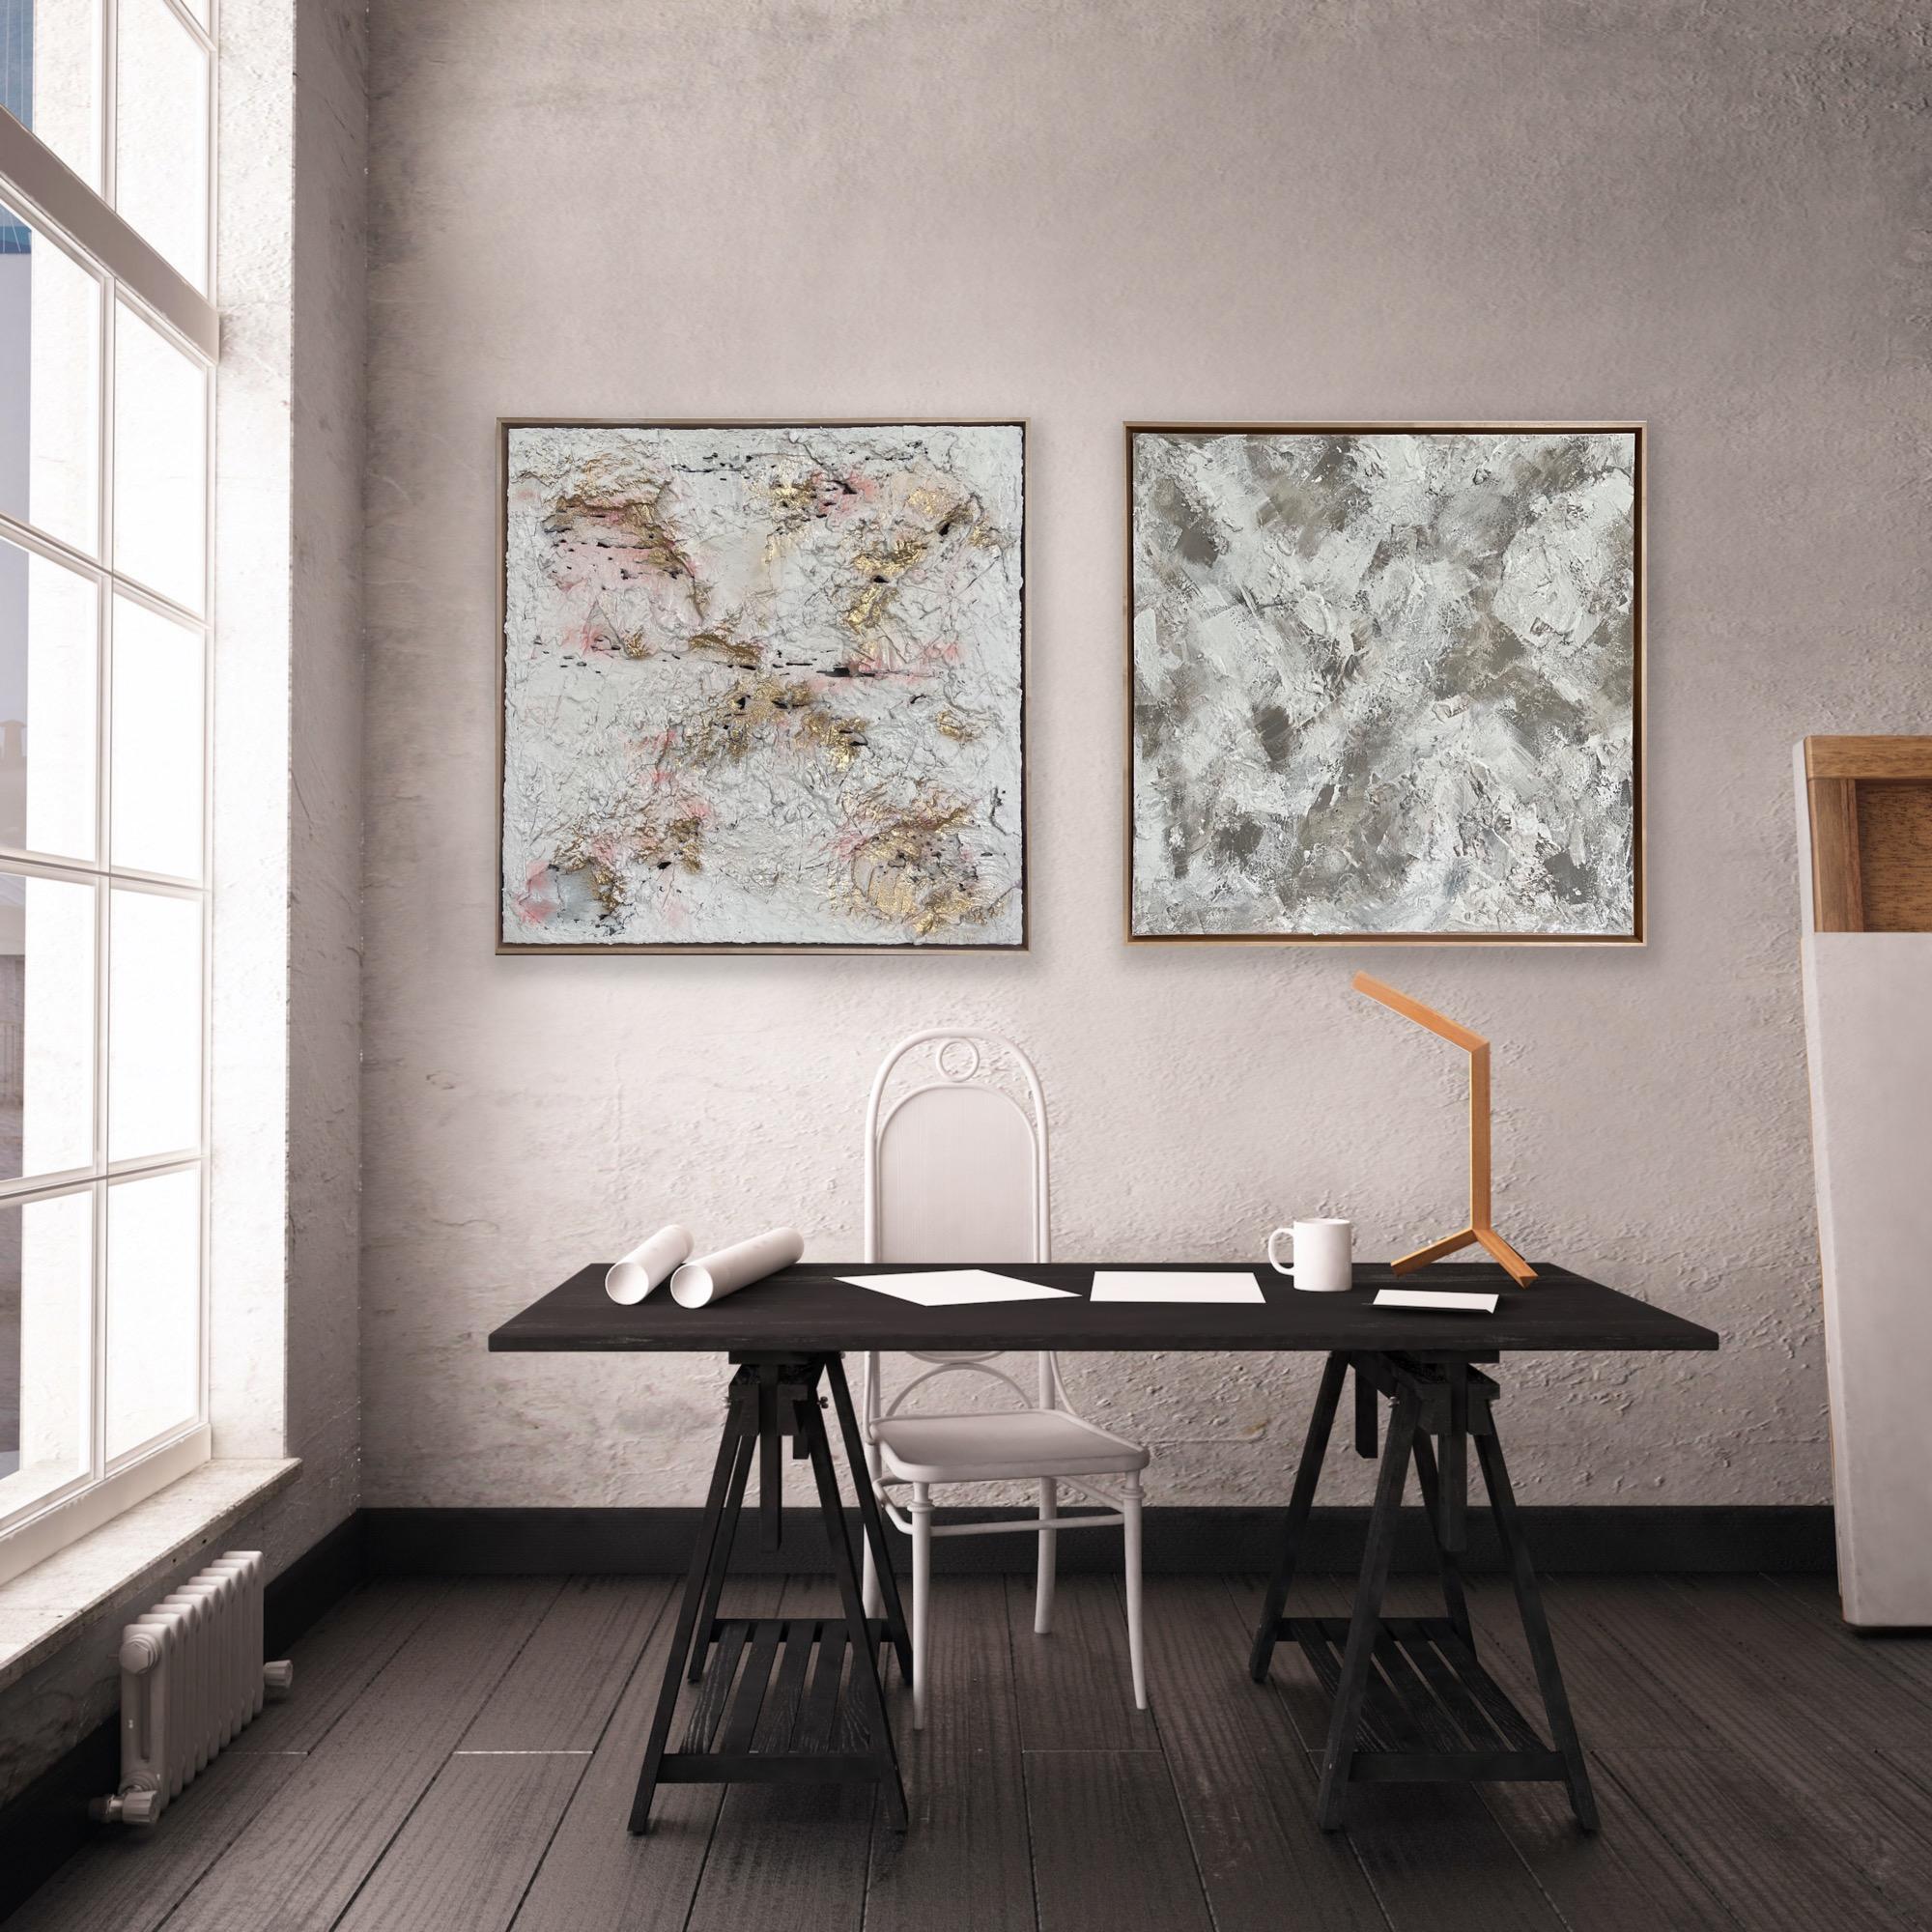 Mixed media original abstract painting by Rajan Seth
Colours : Taupe, Off White, White
Framed in Oak.

ADDITIONAL INFORMATION:
Taupe by Rajan Seth [2023] and Concrete Rose by Rajan Seth [2023]
Original painting
Acrylic paint, mixed media on